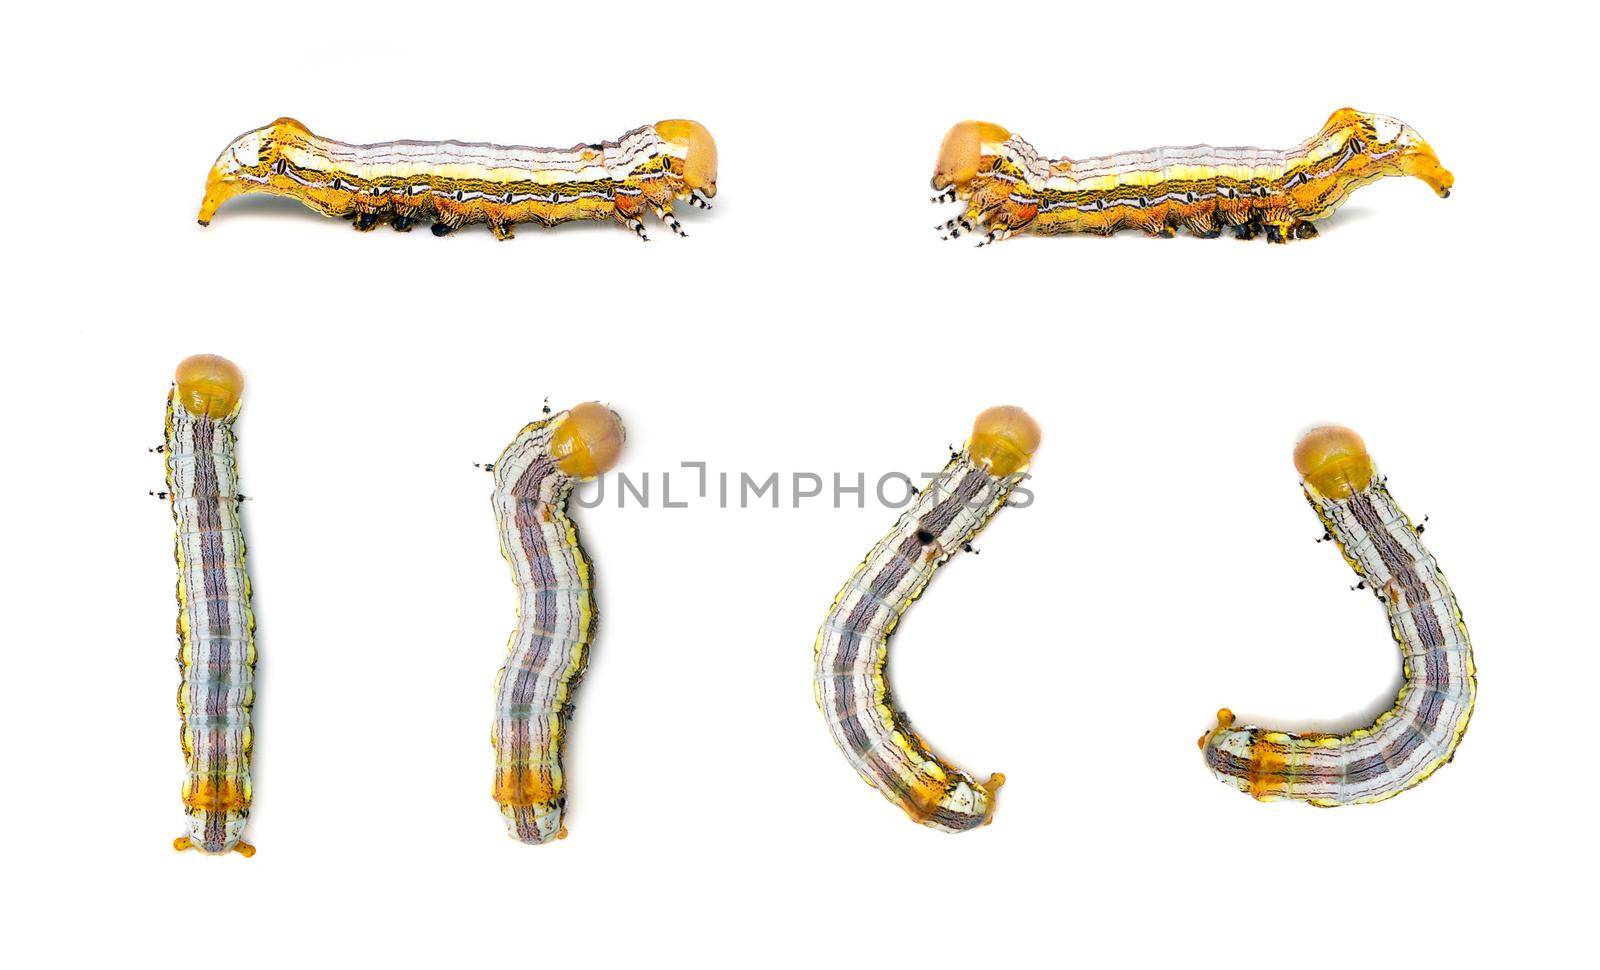 Group of yellow-headed butterfly caterpillars isolated on white background. Animal. Insect.